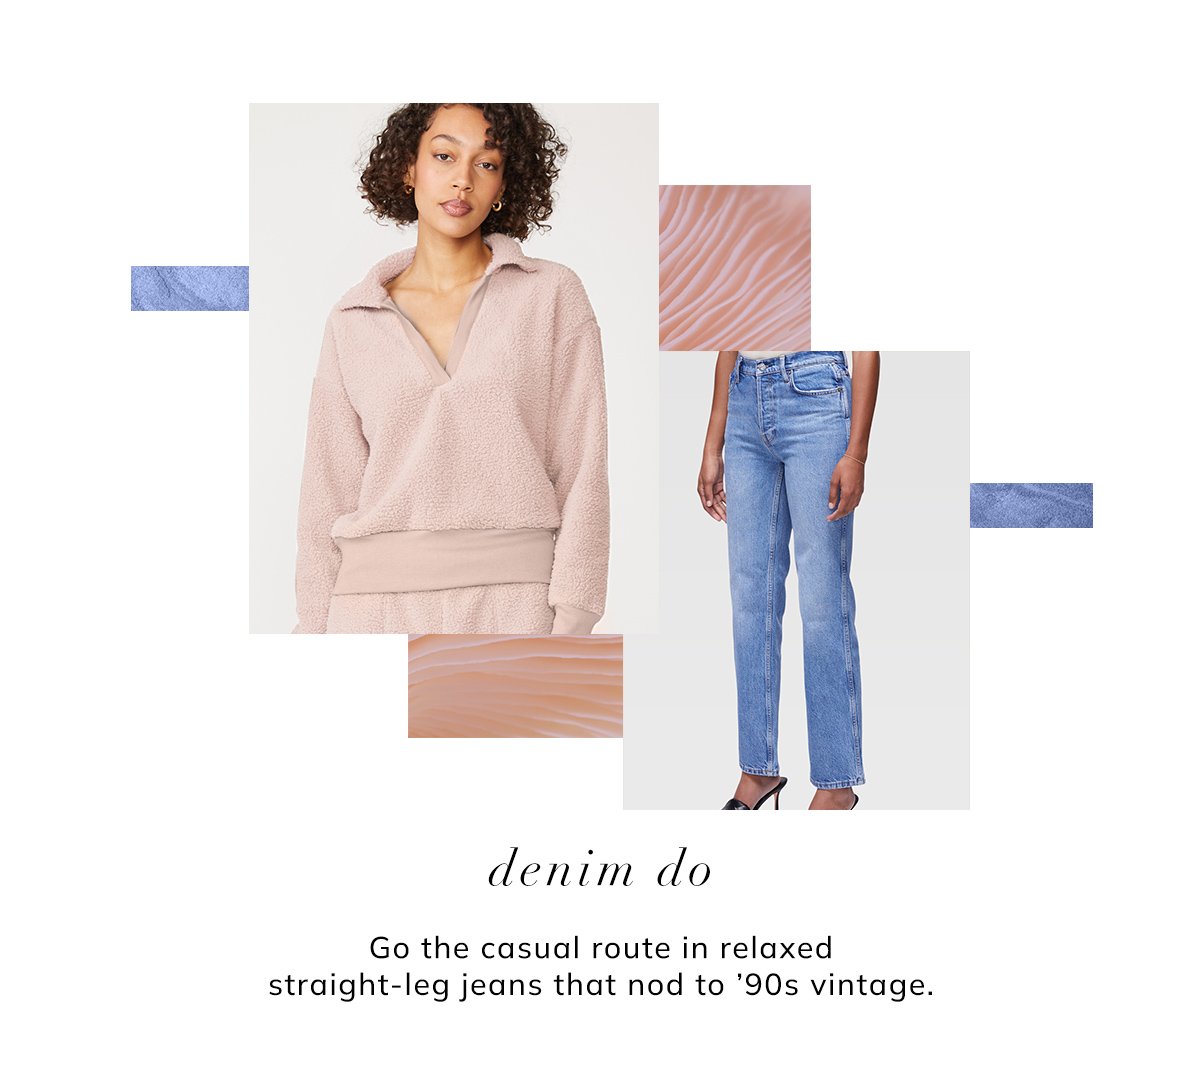 denim do. go the casual route in relazed straight-leg jeans that nod to '90s vintage.